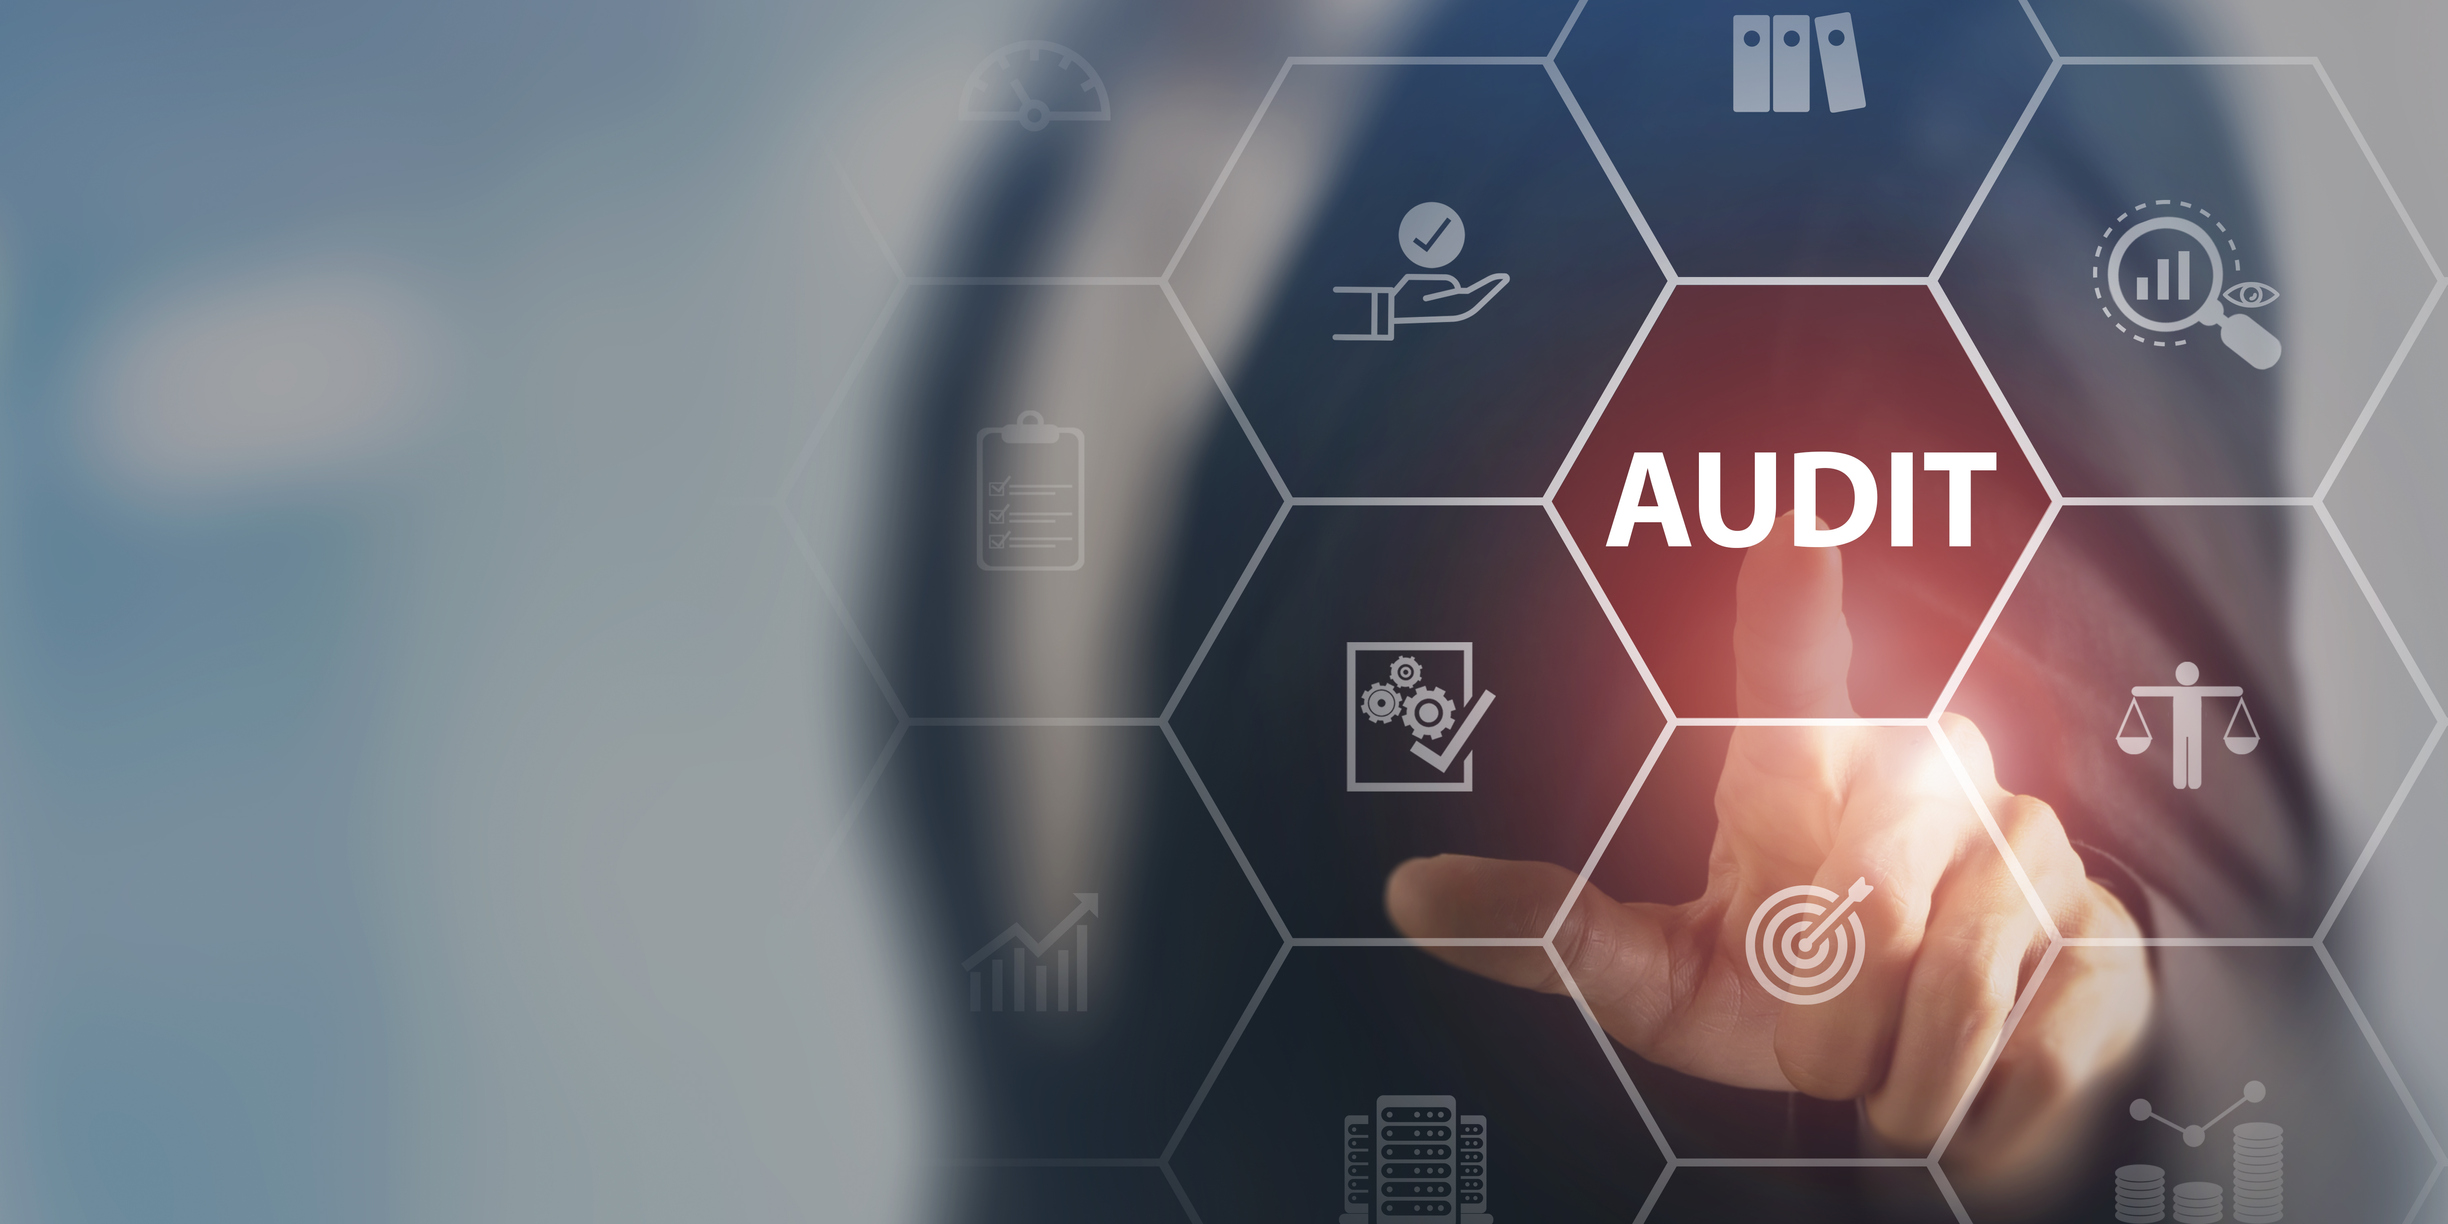 Guide to the Medical Device Single Audit Program (MDSAP)